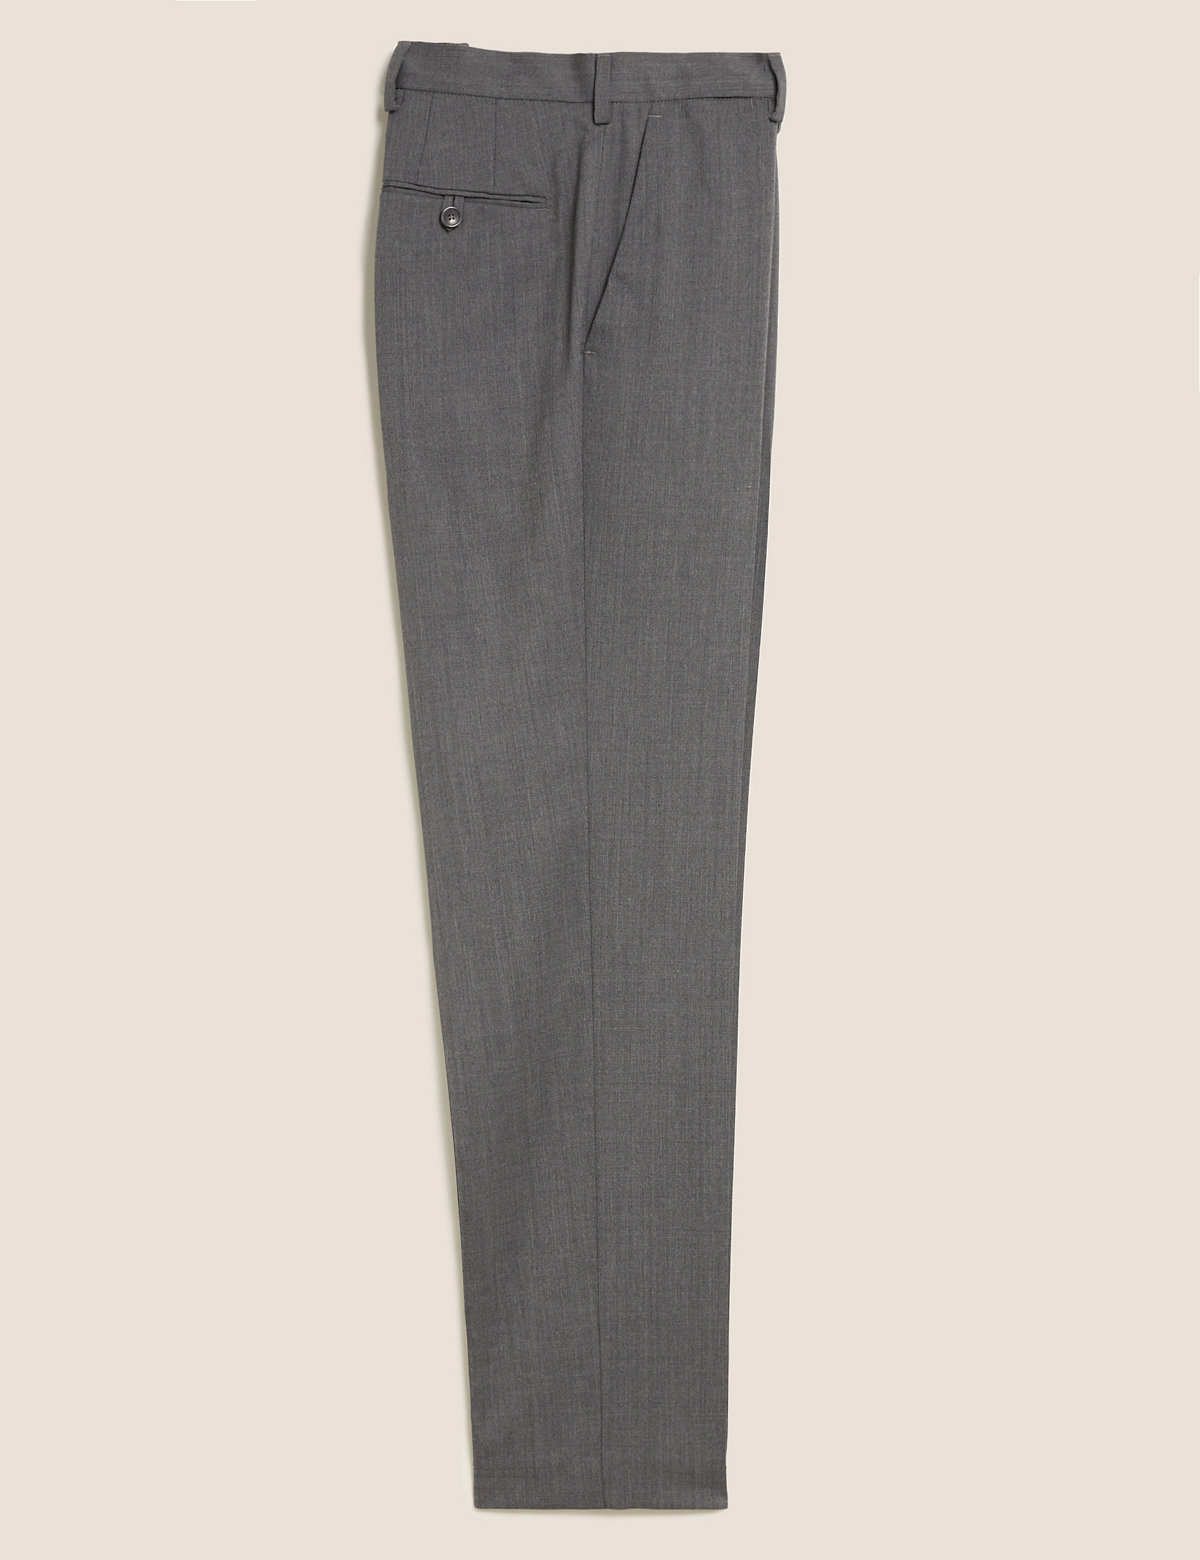 Regular Fit Wool Blend Flat Front Trousers